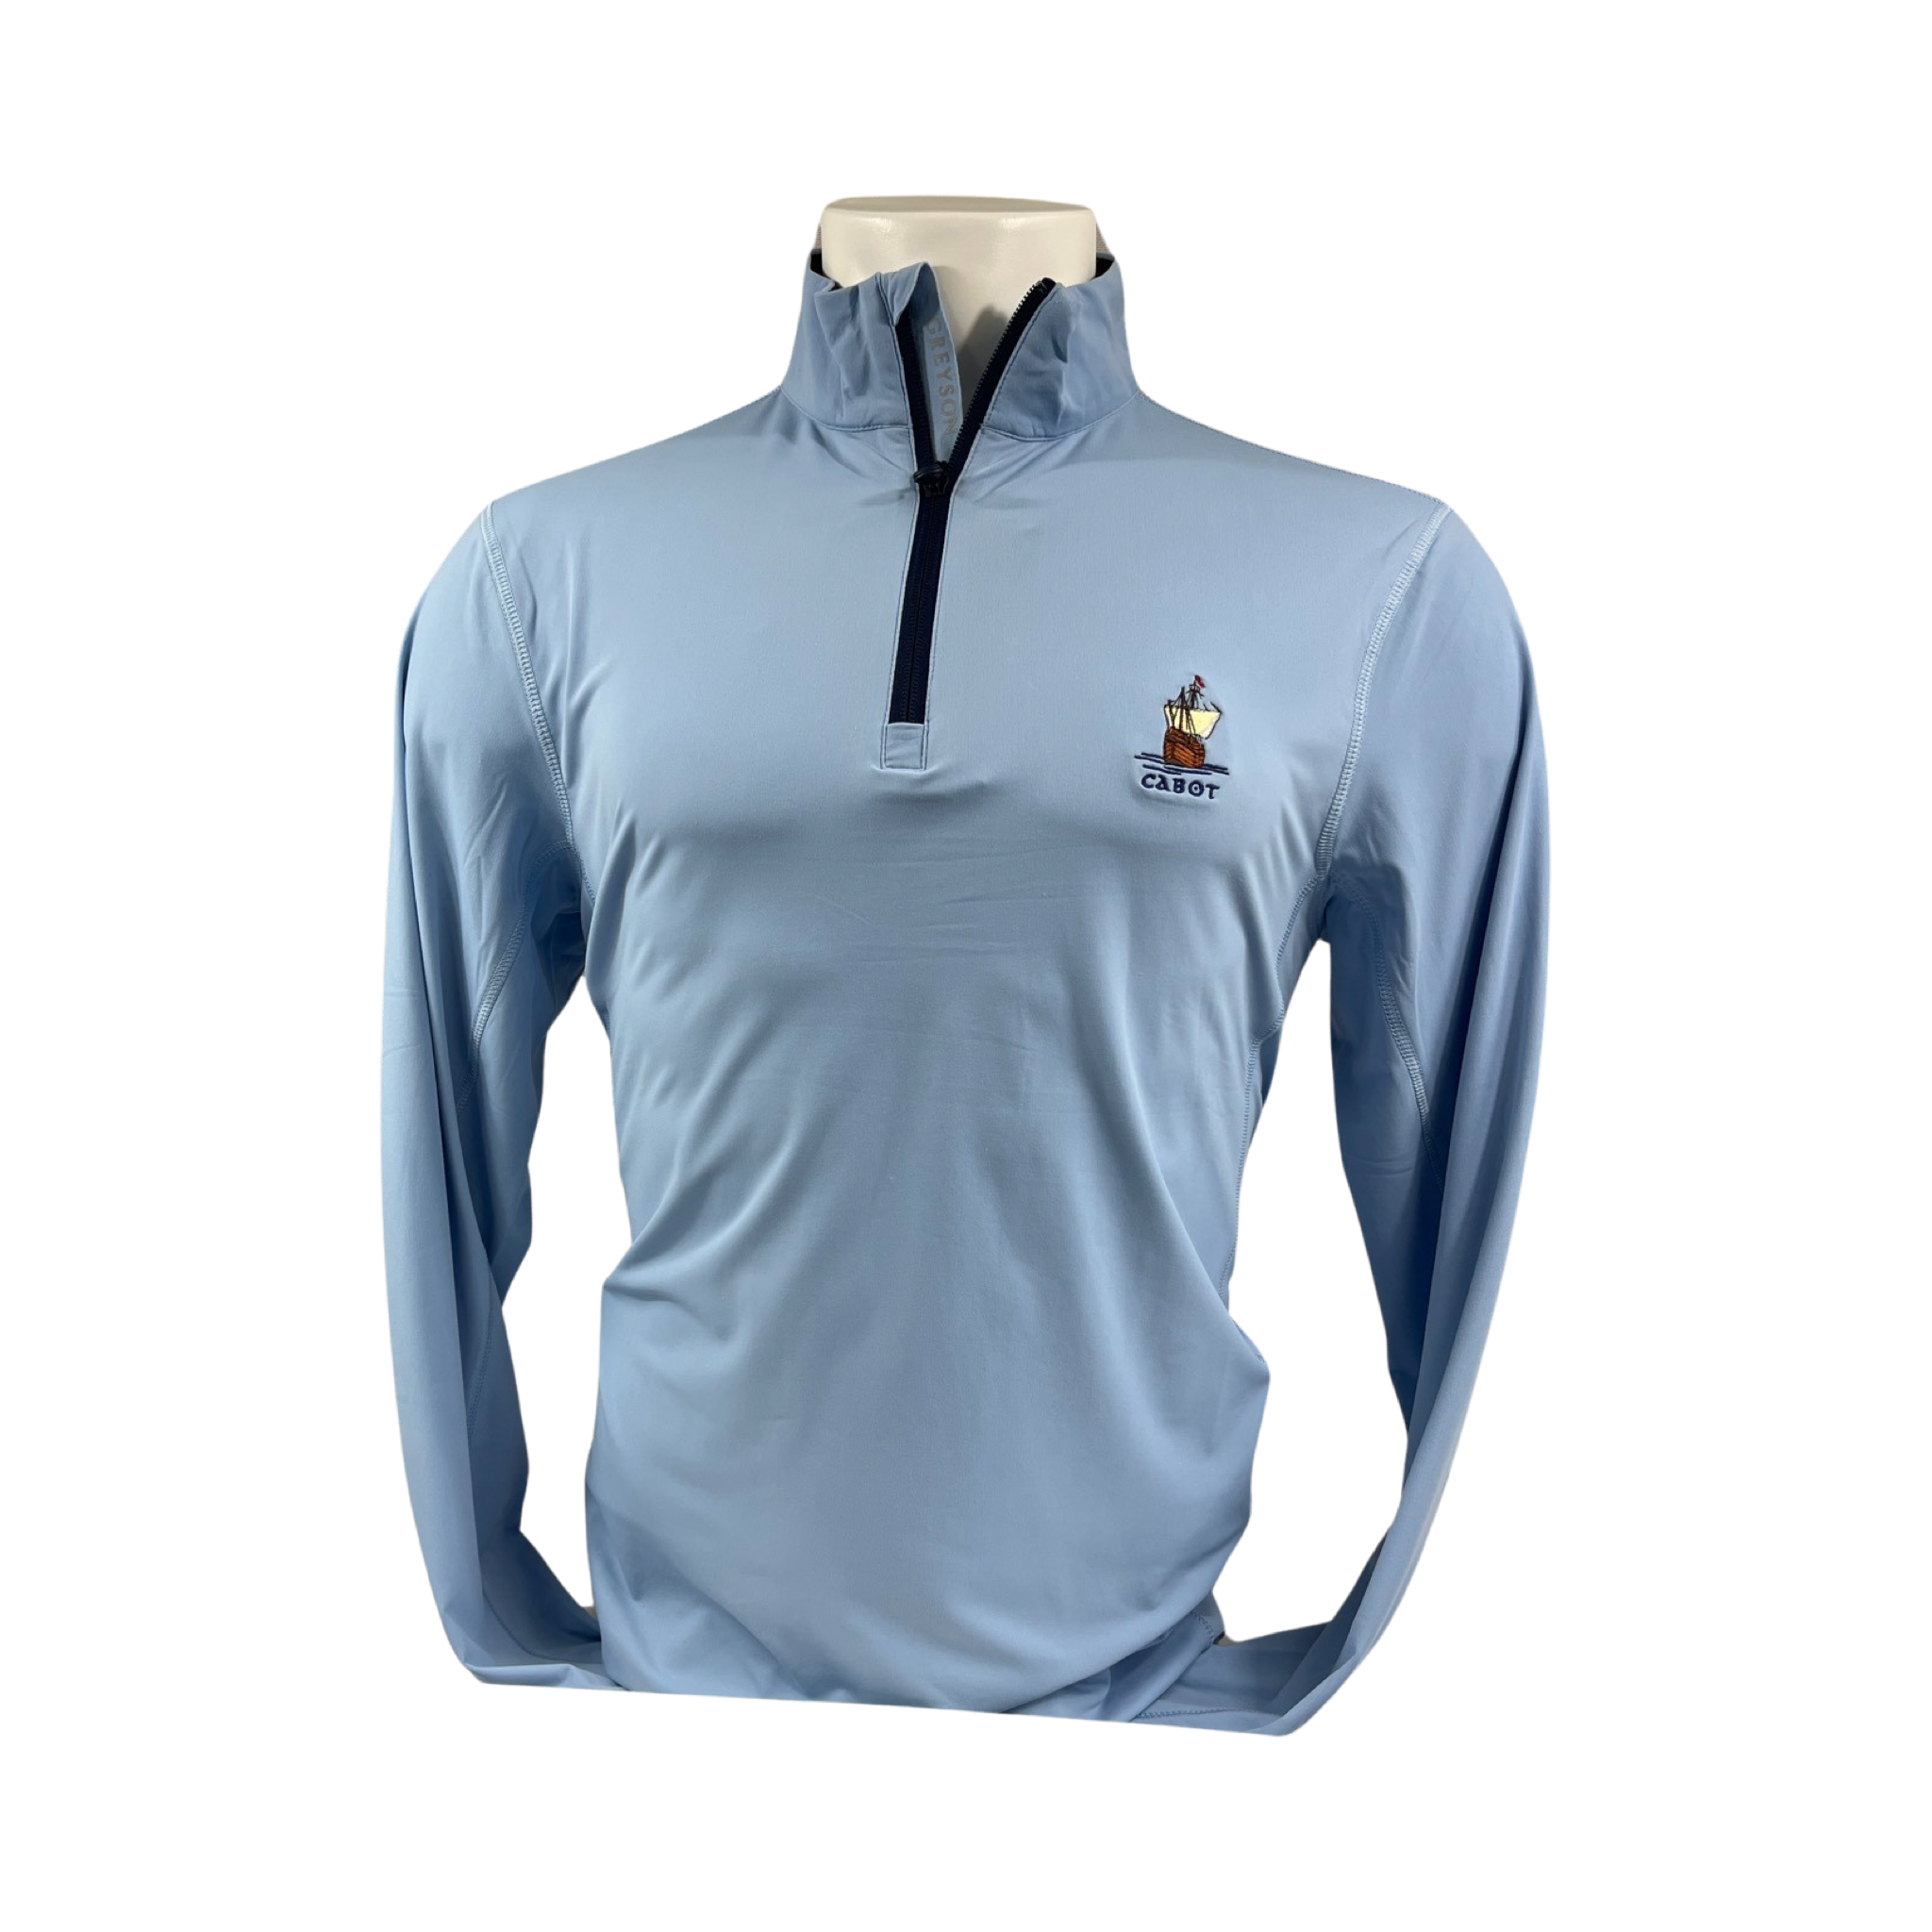 Greyson Cabot Links Tate 1/4 Zip Pullover